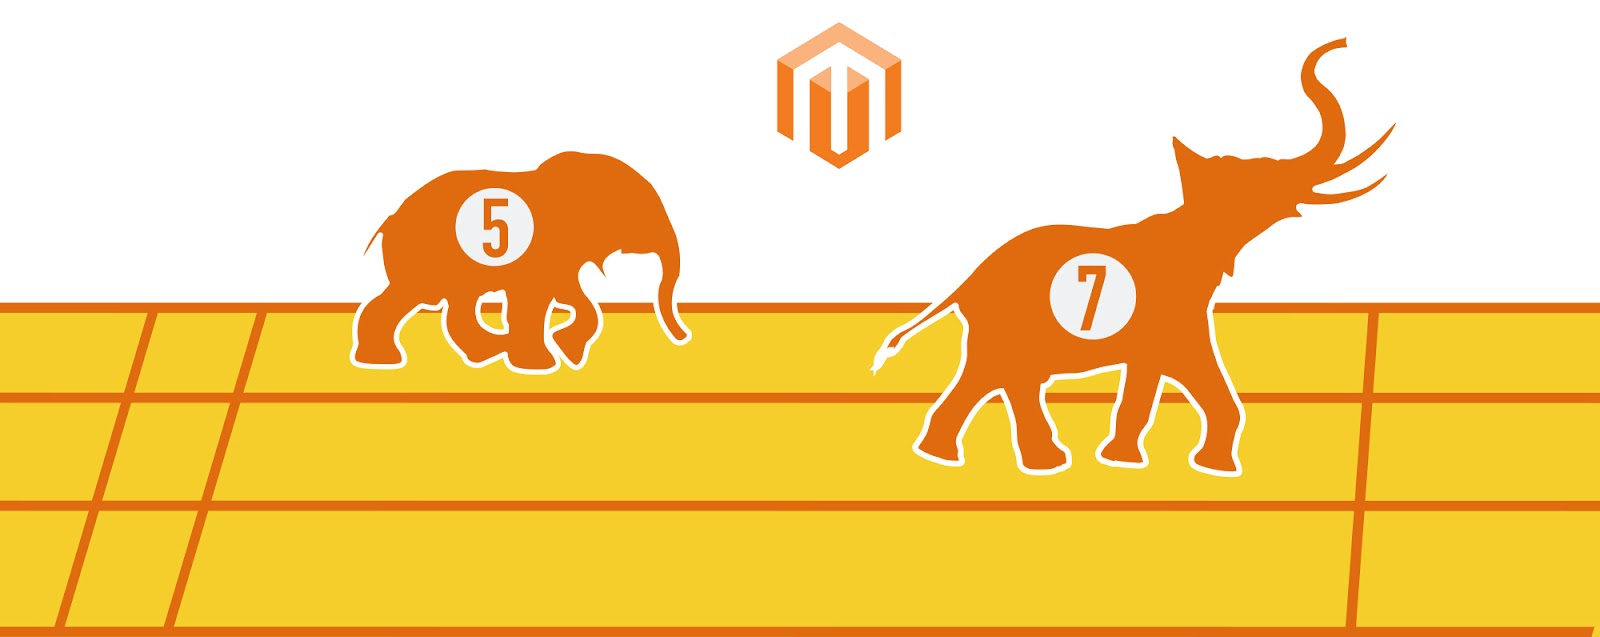 PHP 7 in Magento 2